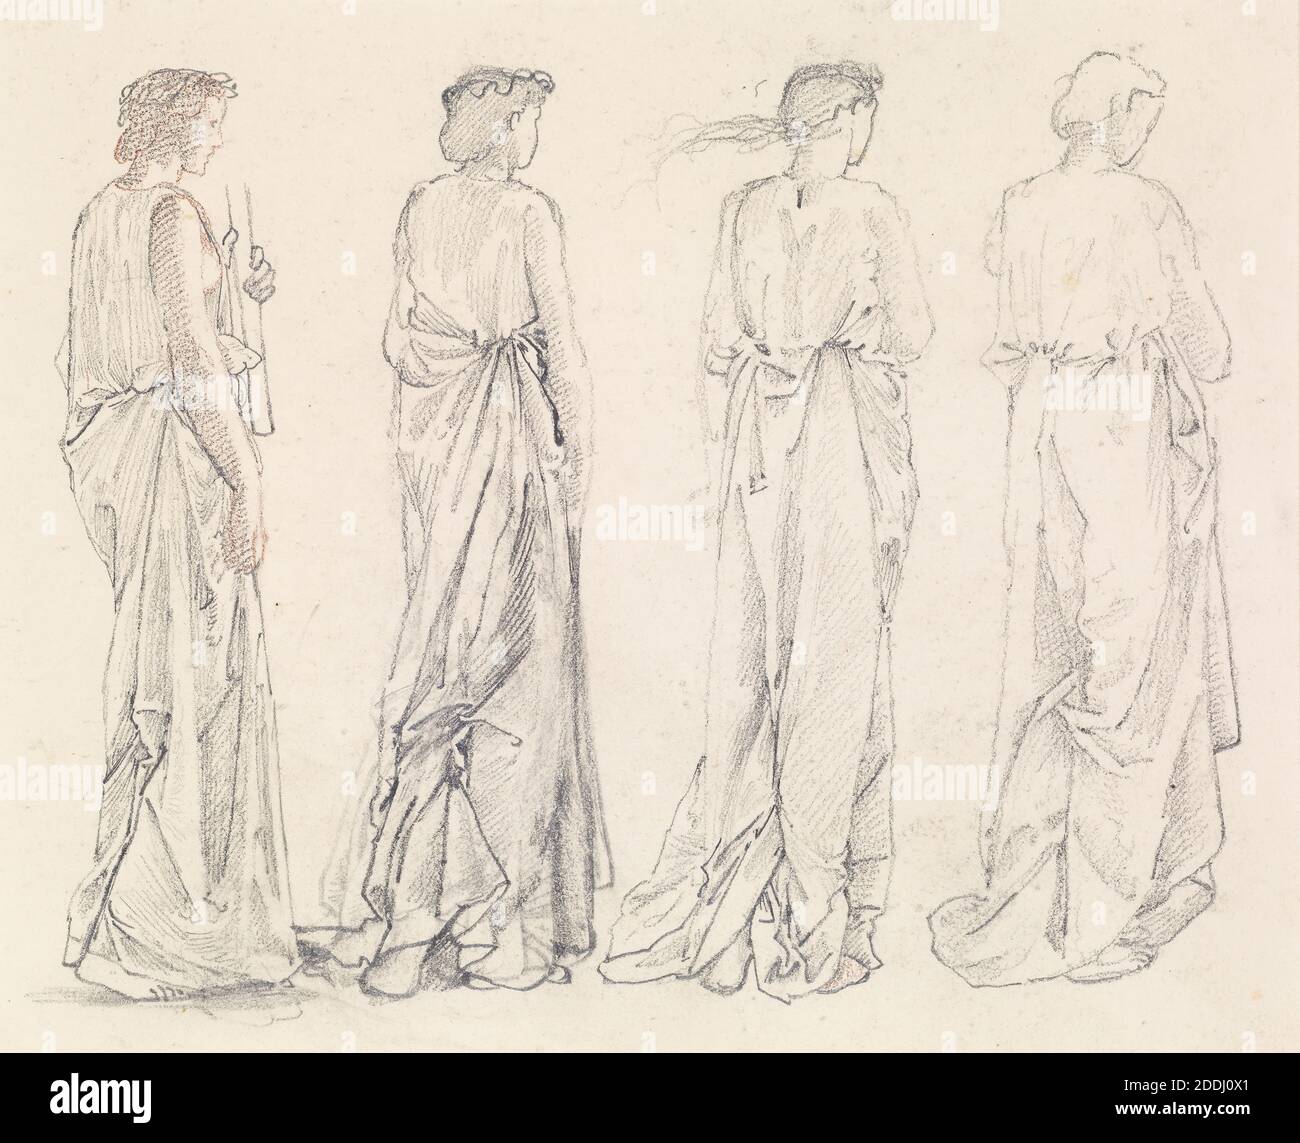 St George Series, Four Studies of Female Attendants for 'The Princess led to the Dragon', 1865-1866 Artist: Sir Edward Burne-Jones Four full length three-quarter view female figures, in flowing costume., Art Movement, Pre-Raphaelite, Costume, Drawing, Pencil, Female, Works on Paper Stock Photo